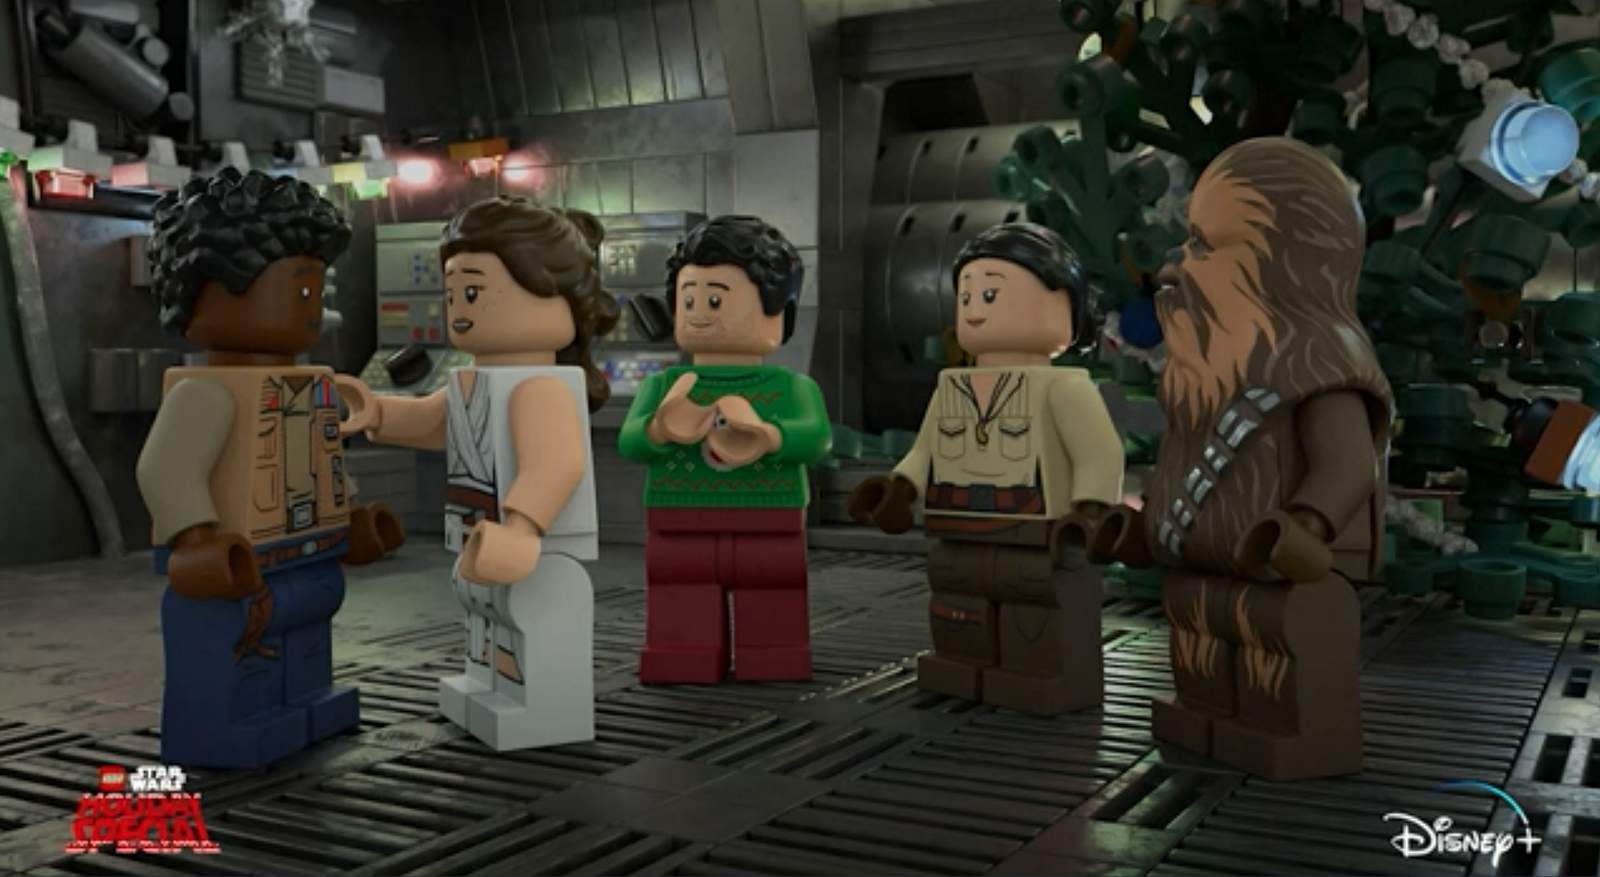 Lego Star Wars special coming to Disney+